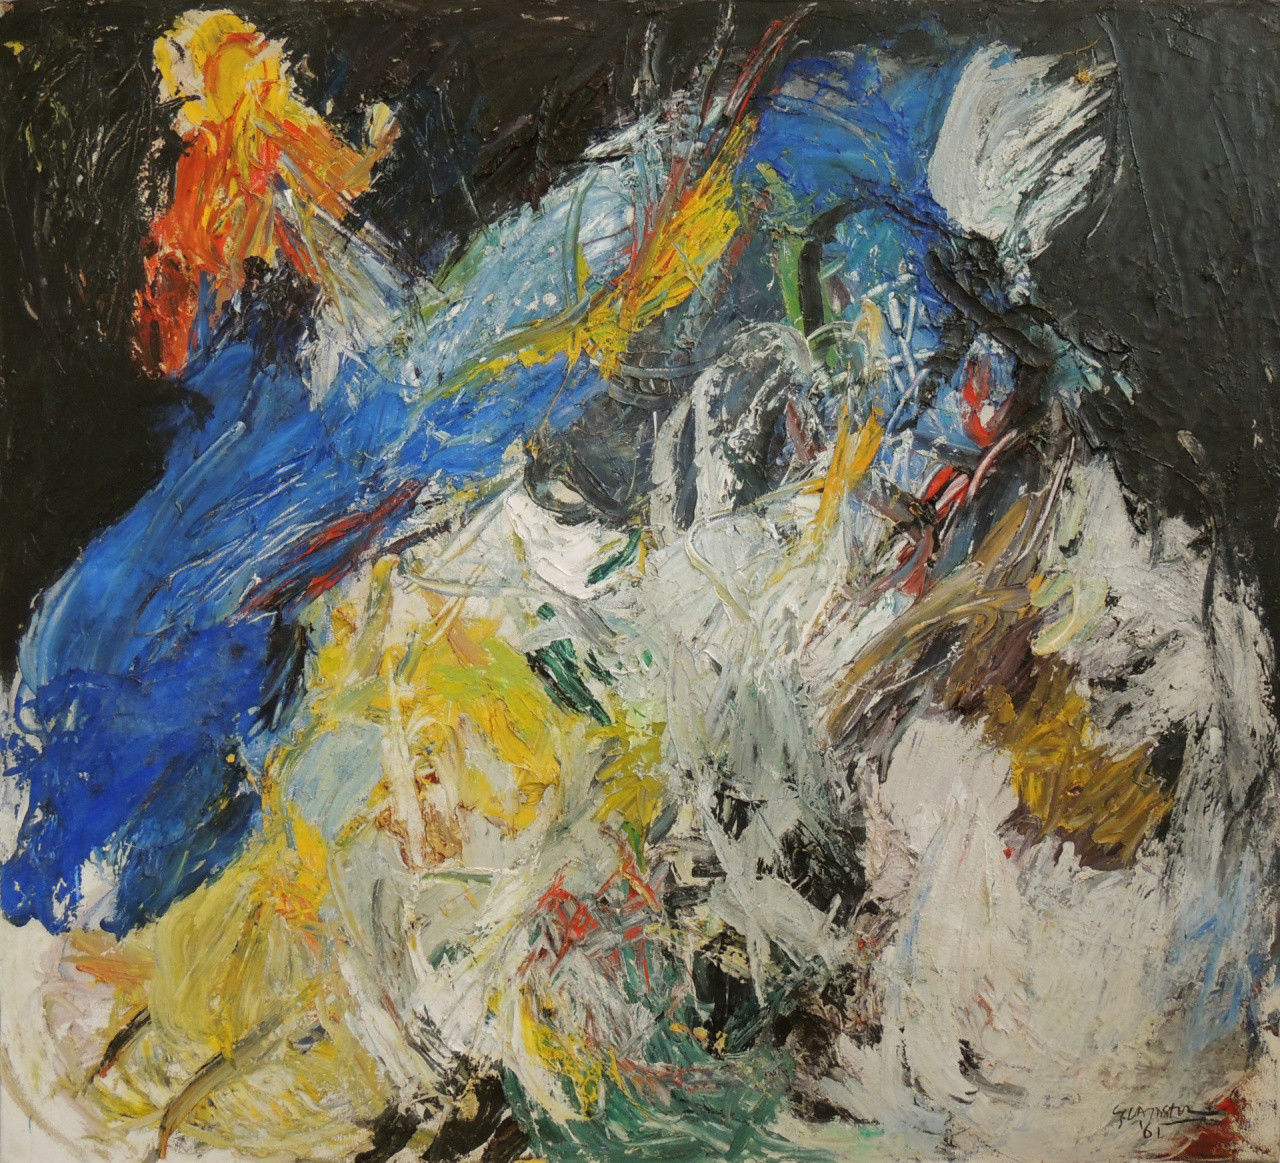 Abstract oil painting, La Nuit, Ger Lataster, 1961.